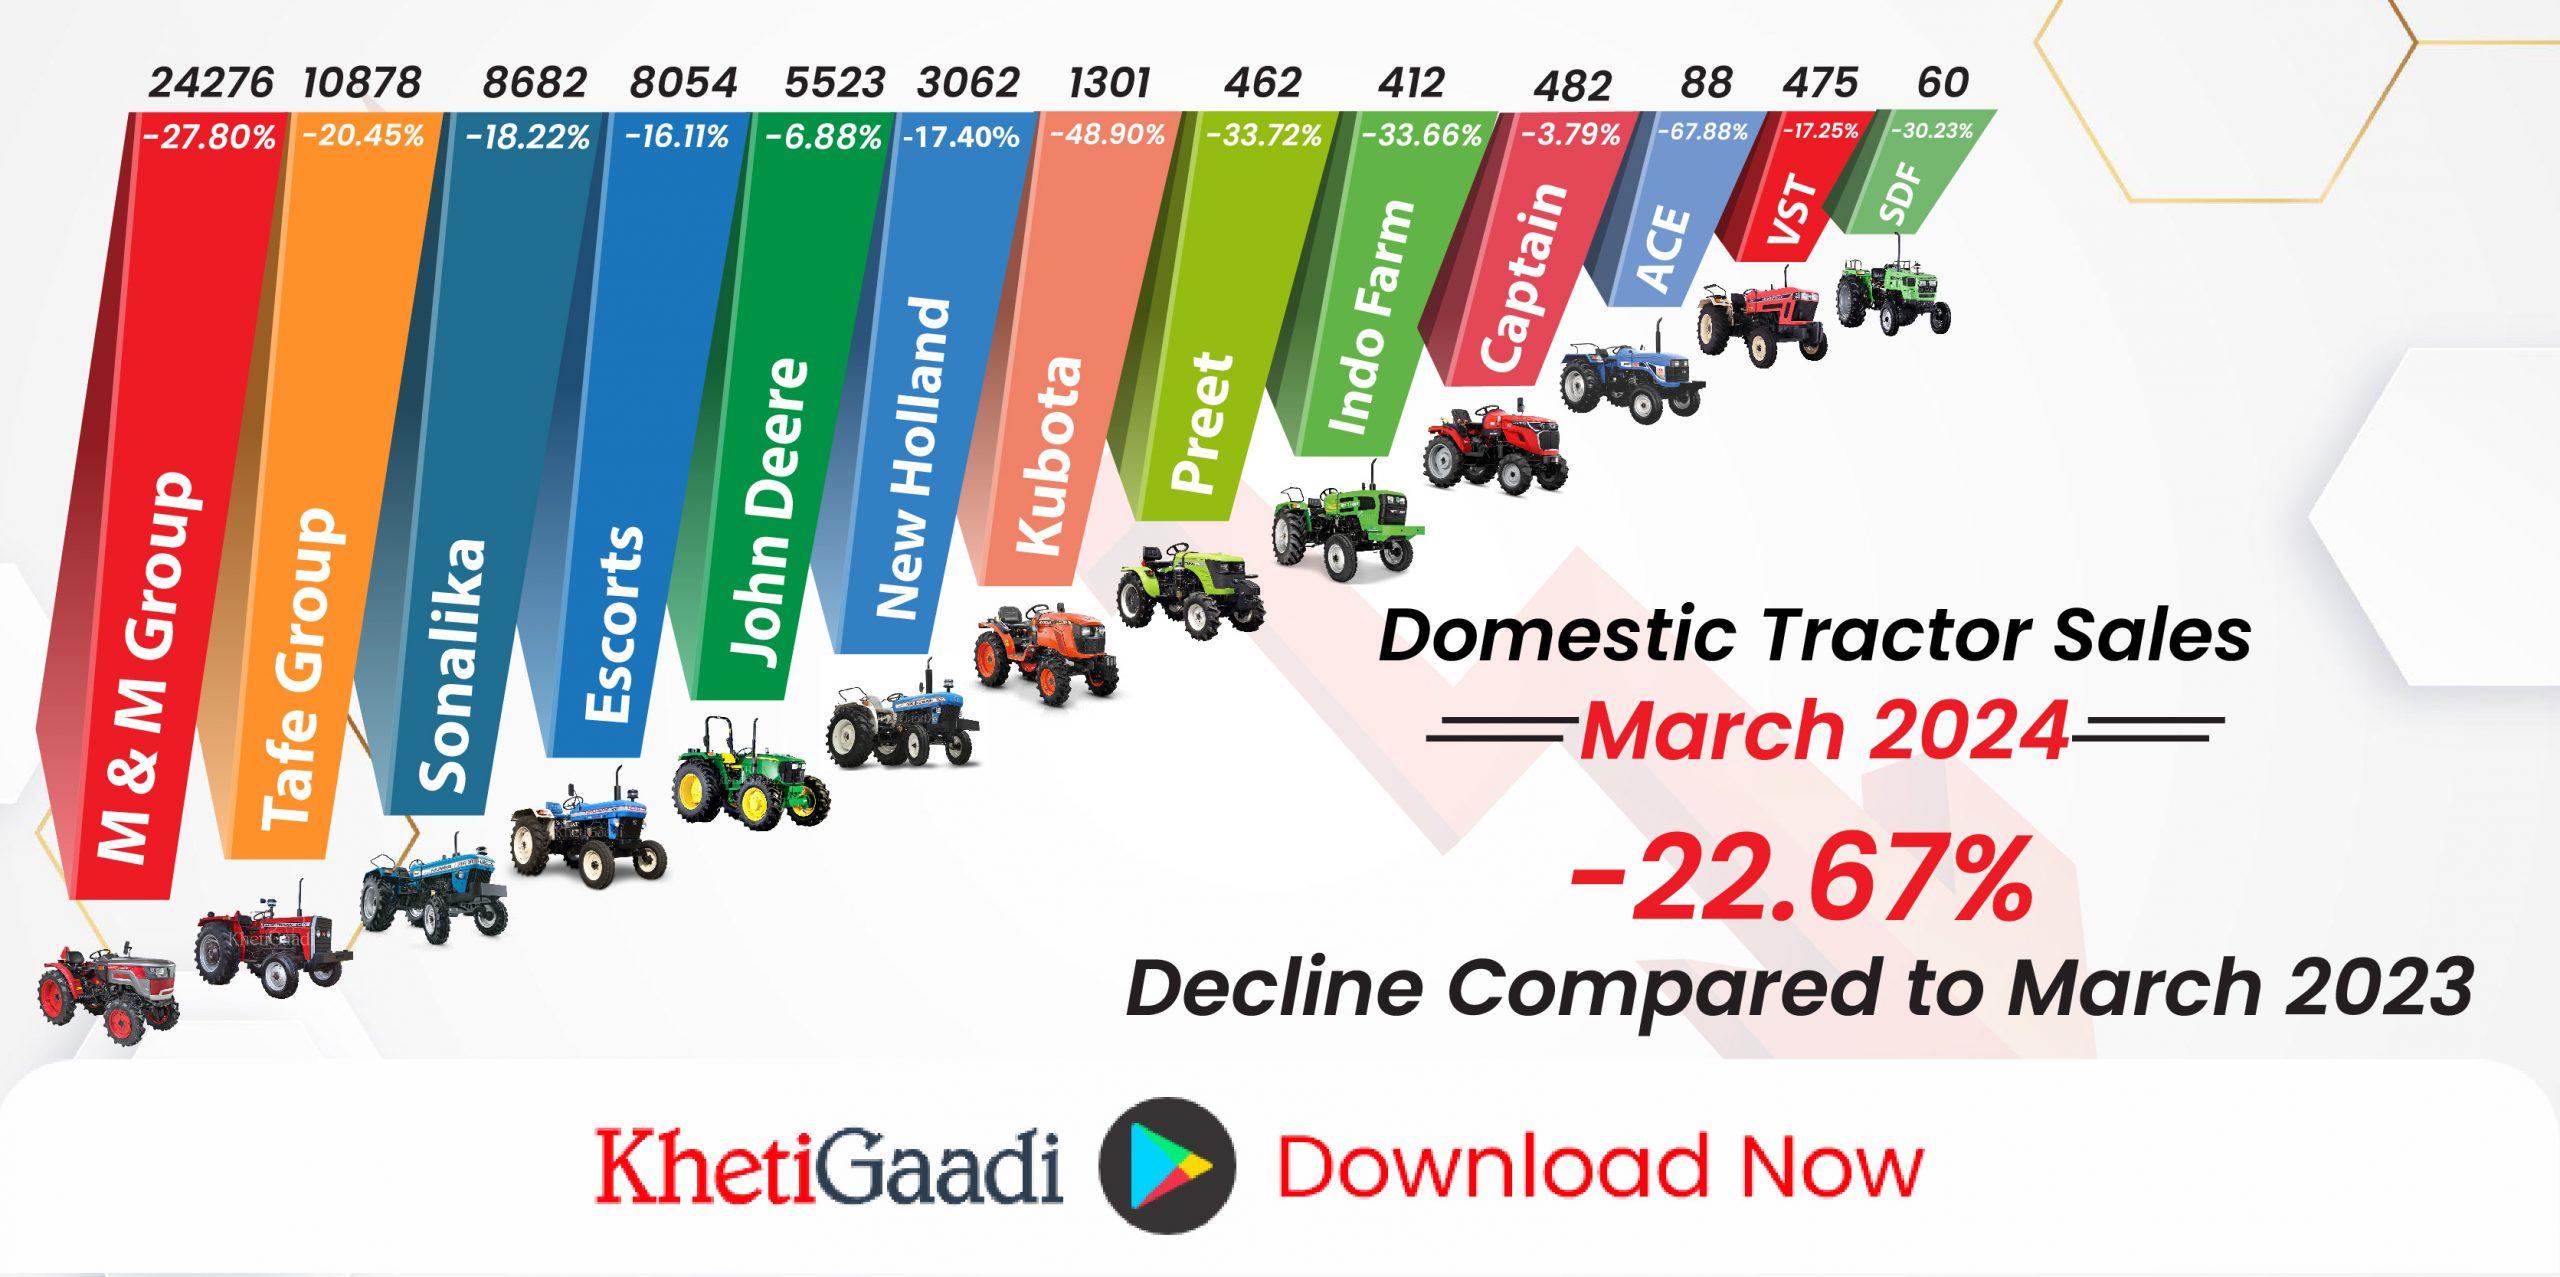 Domestic Tractor Sales Report for March 2024: Sales  63,755 units.